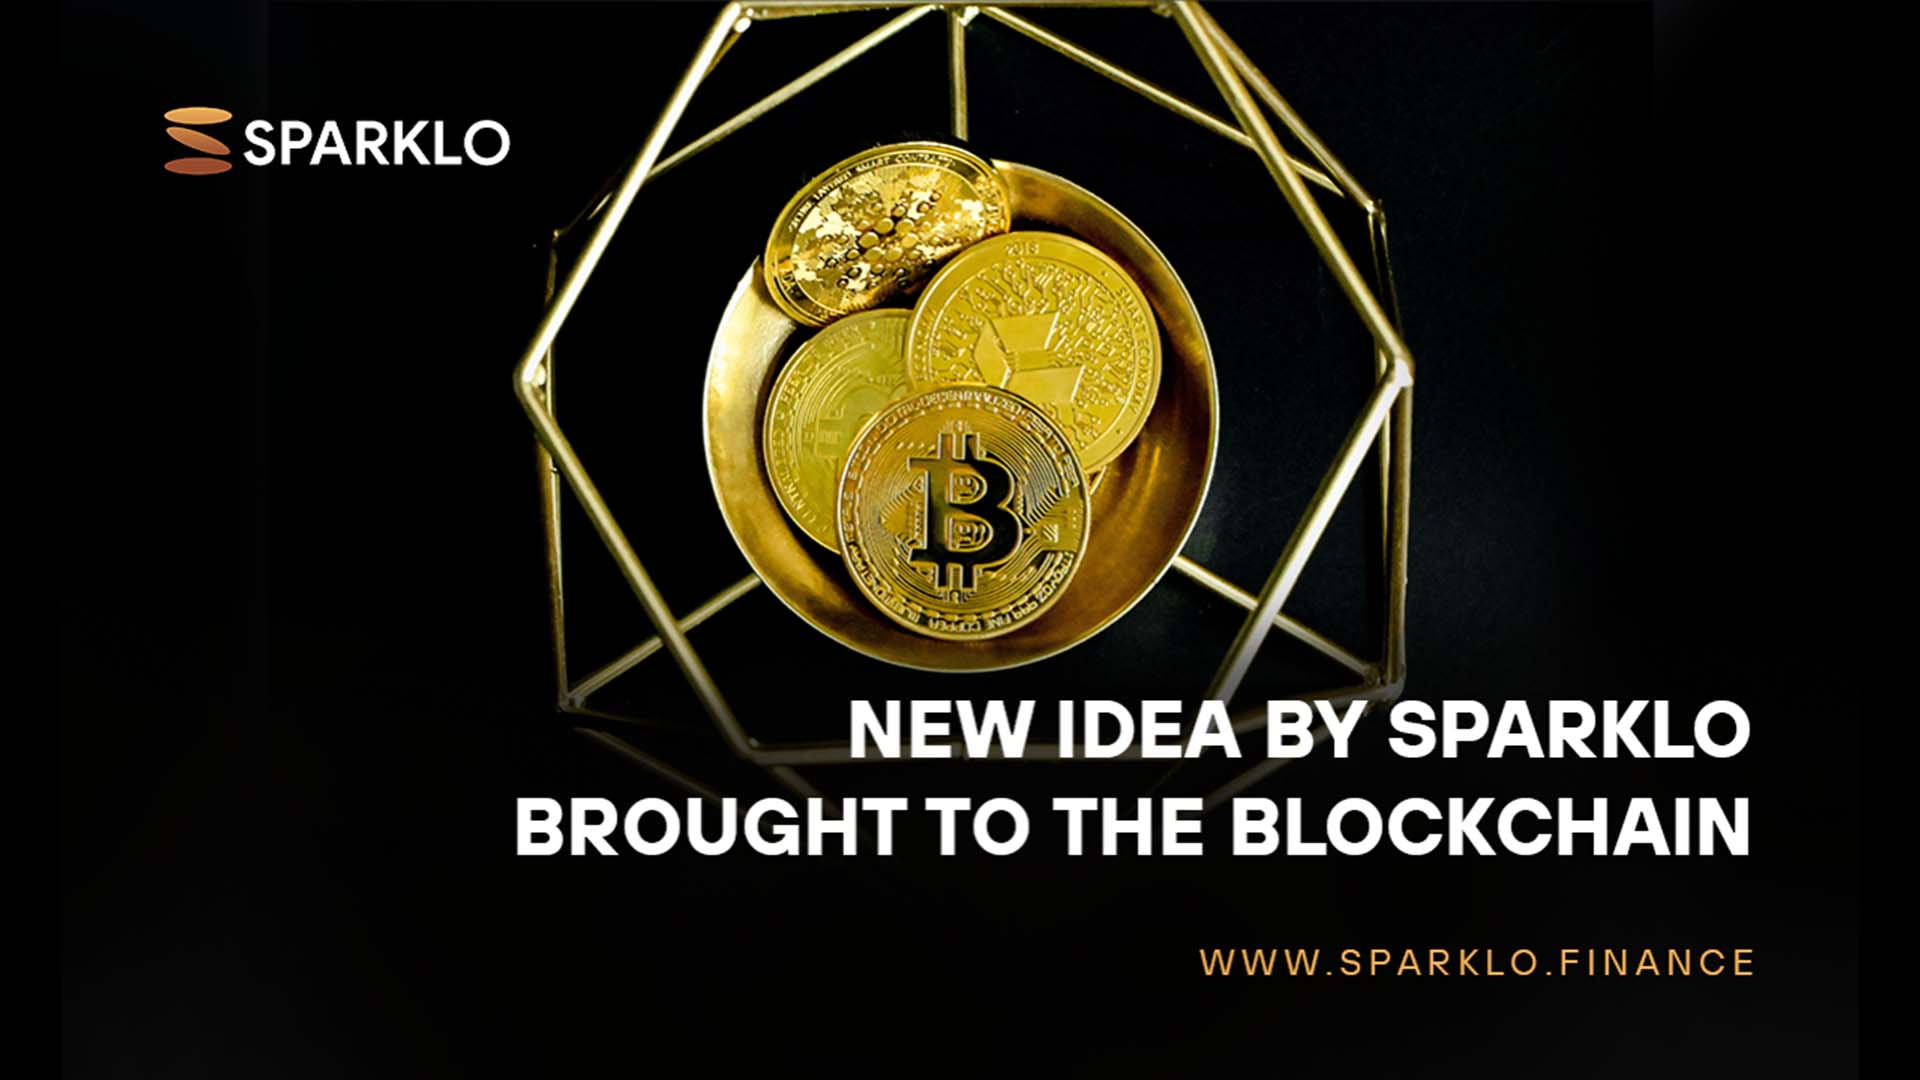 Cardano Stays Strong, SUI Faces Dip, as Sparklo Close to $2 Million in Presale